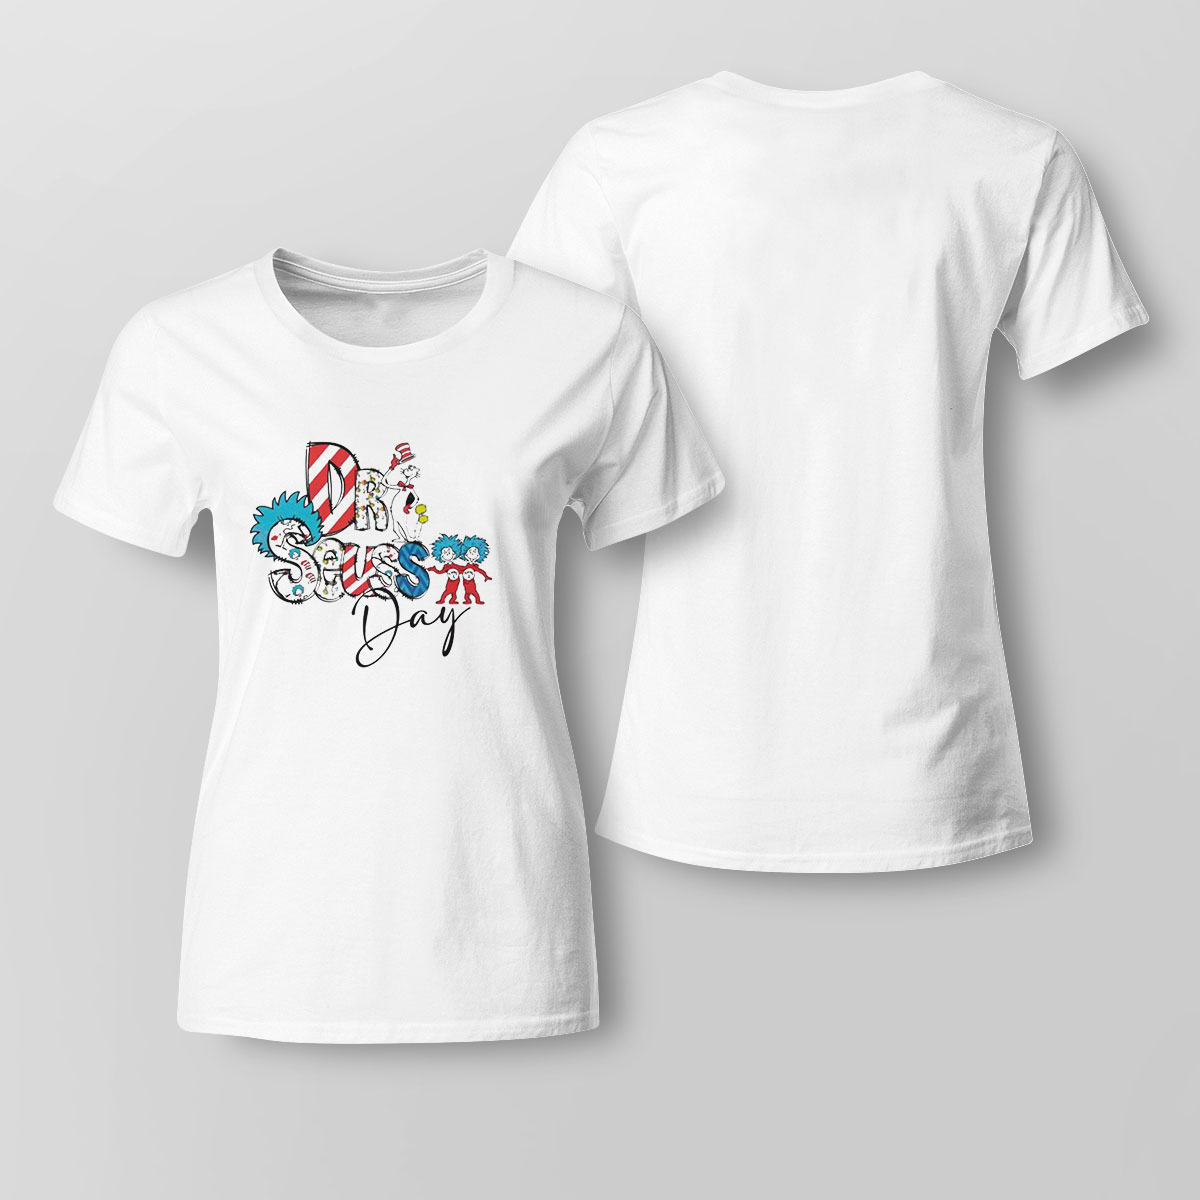 Read Across America Day Happy Dr Seuss Day Shirt